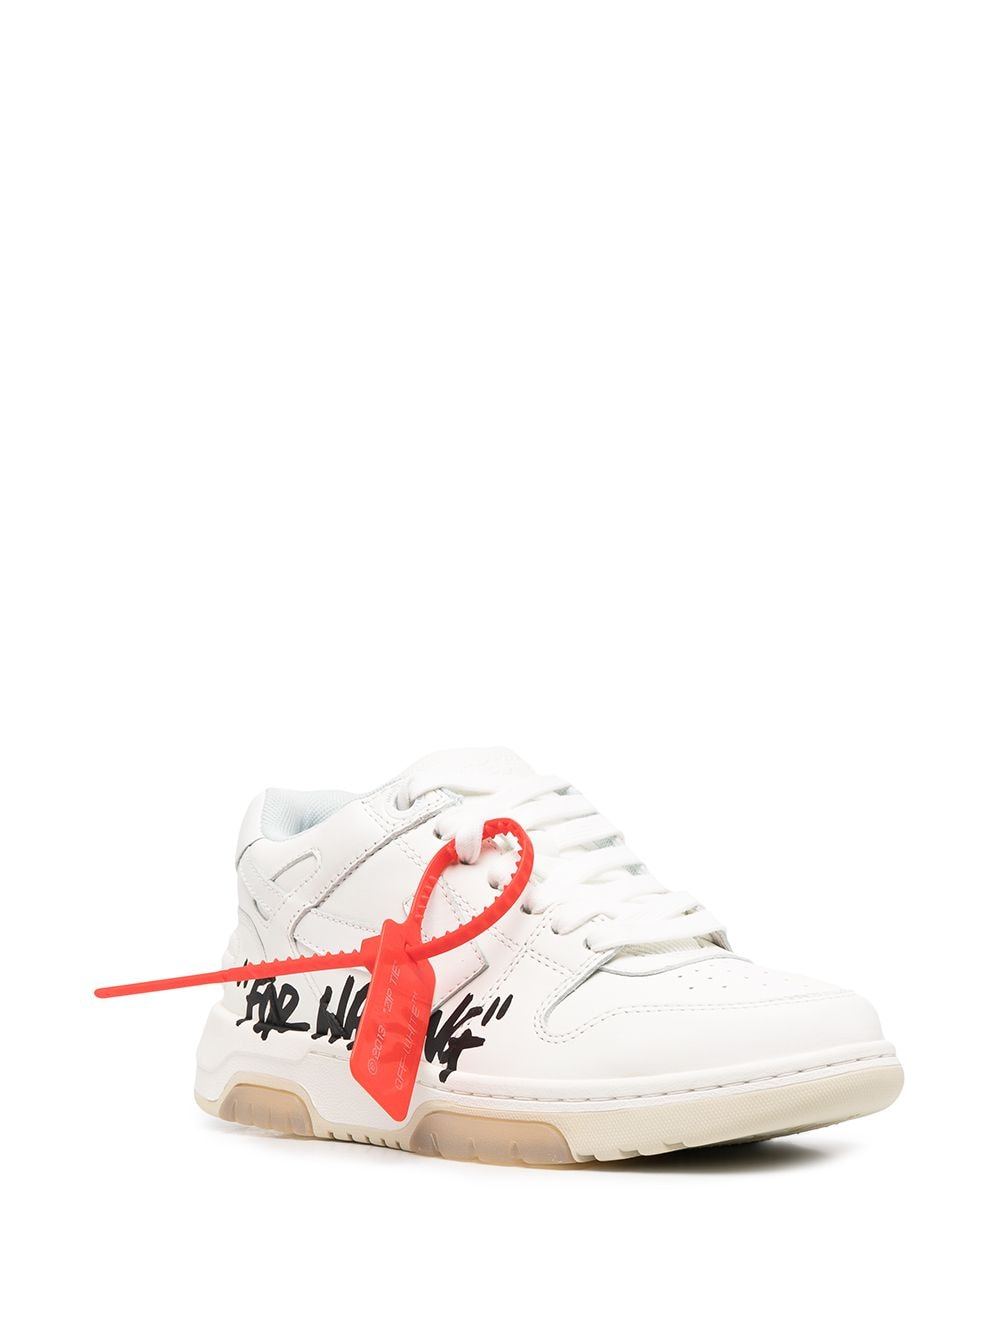 OFF-WHITE WOMEN For Walking Out of Office sneakers White/Black - MAISONDEFASHION.COM